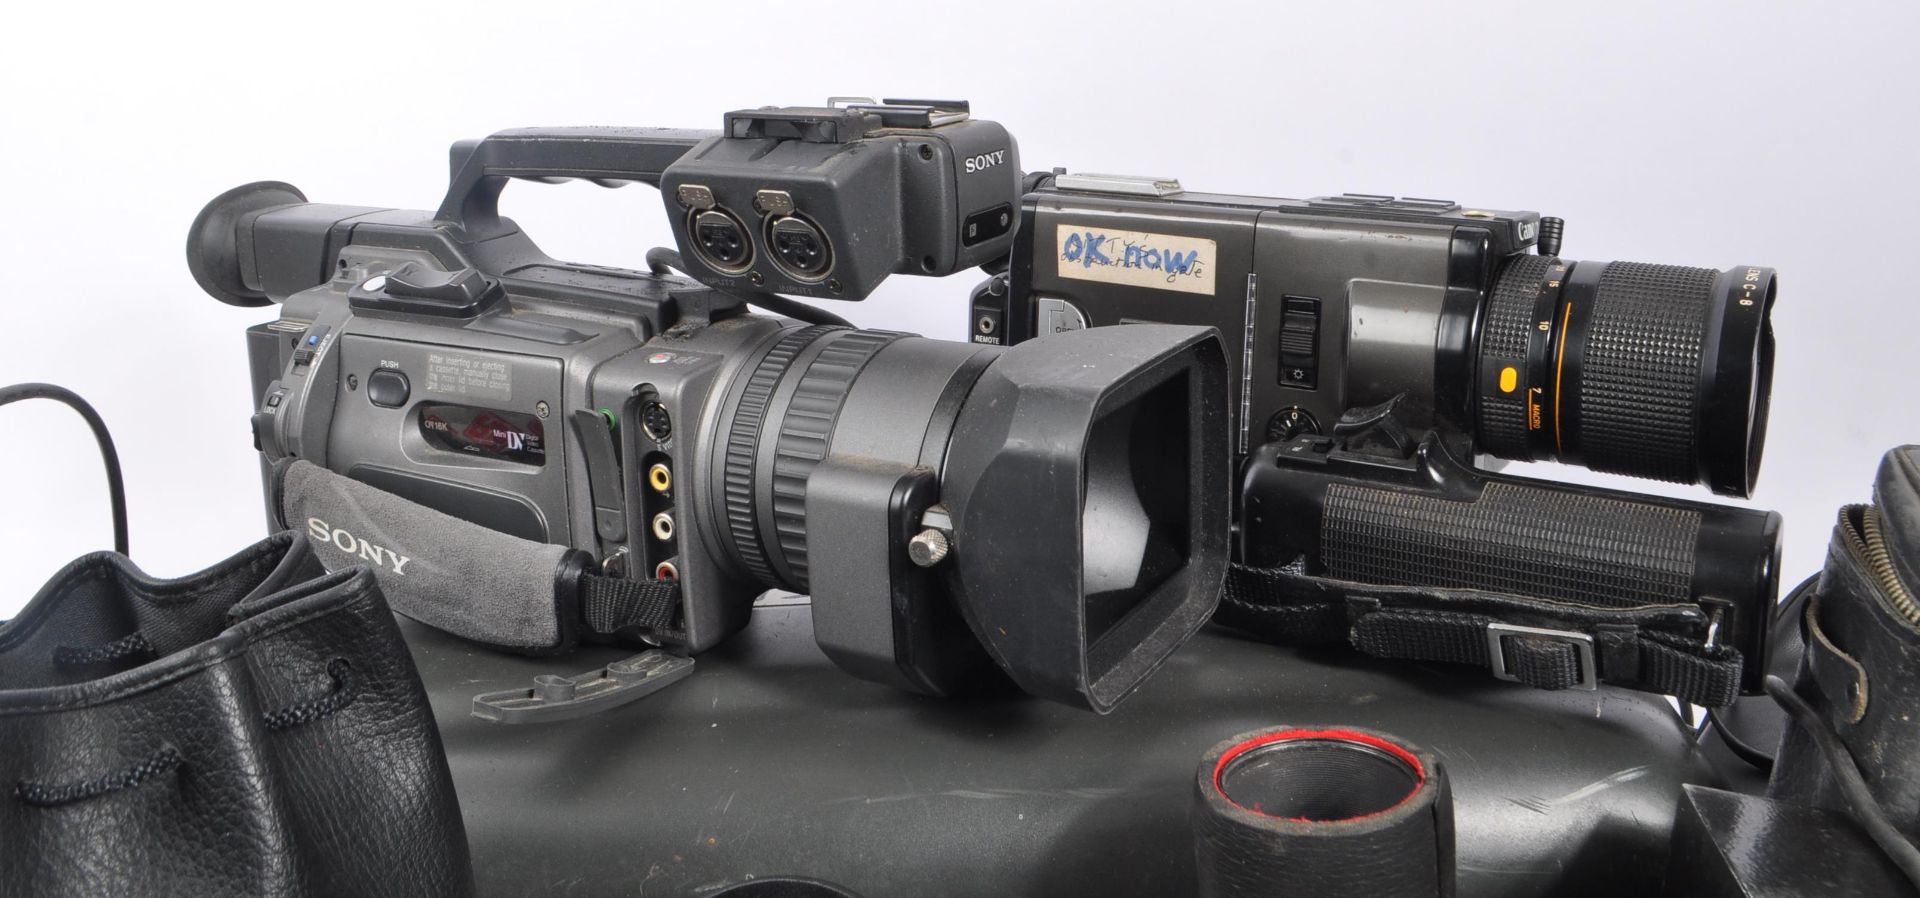 LARGE COLLECTION OF DIGITAL CAMCORDERS - Image 3 of 8